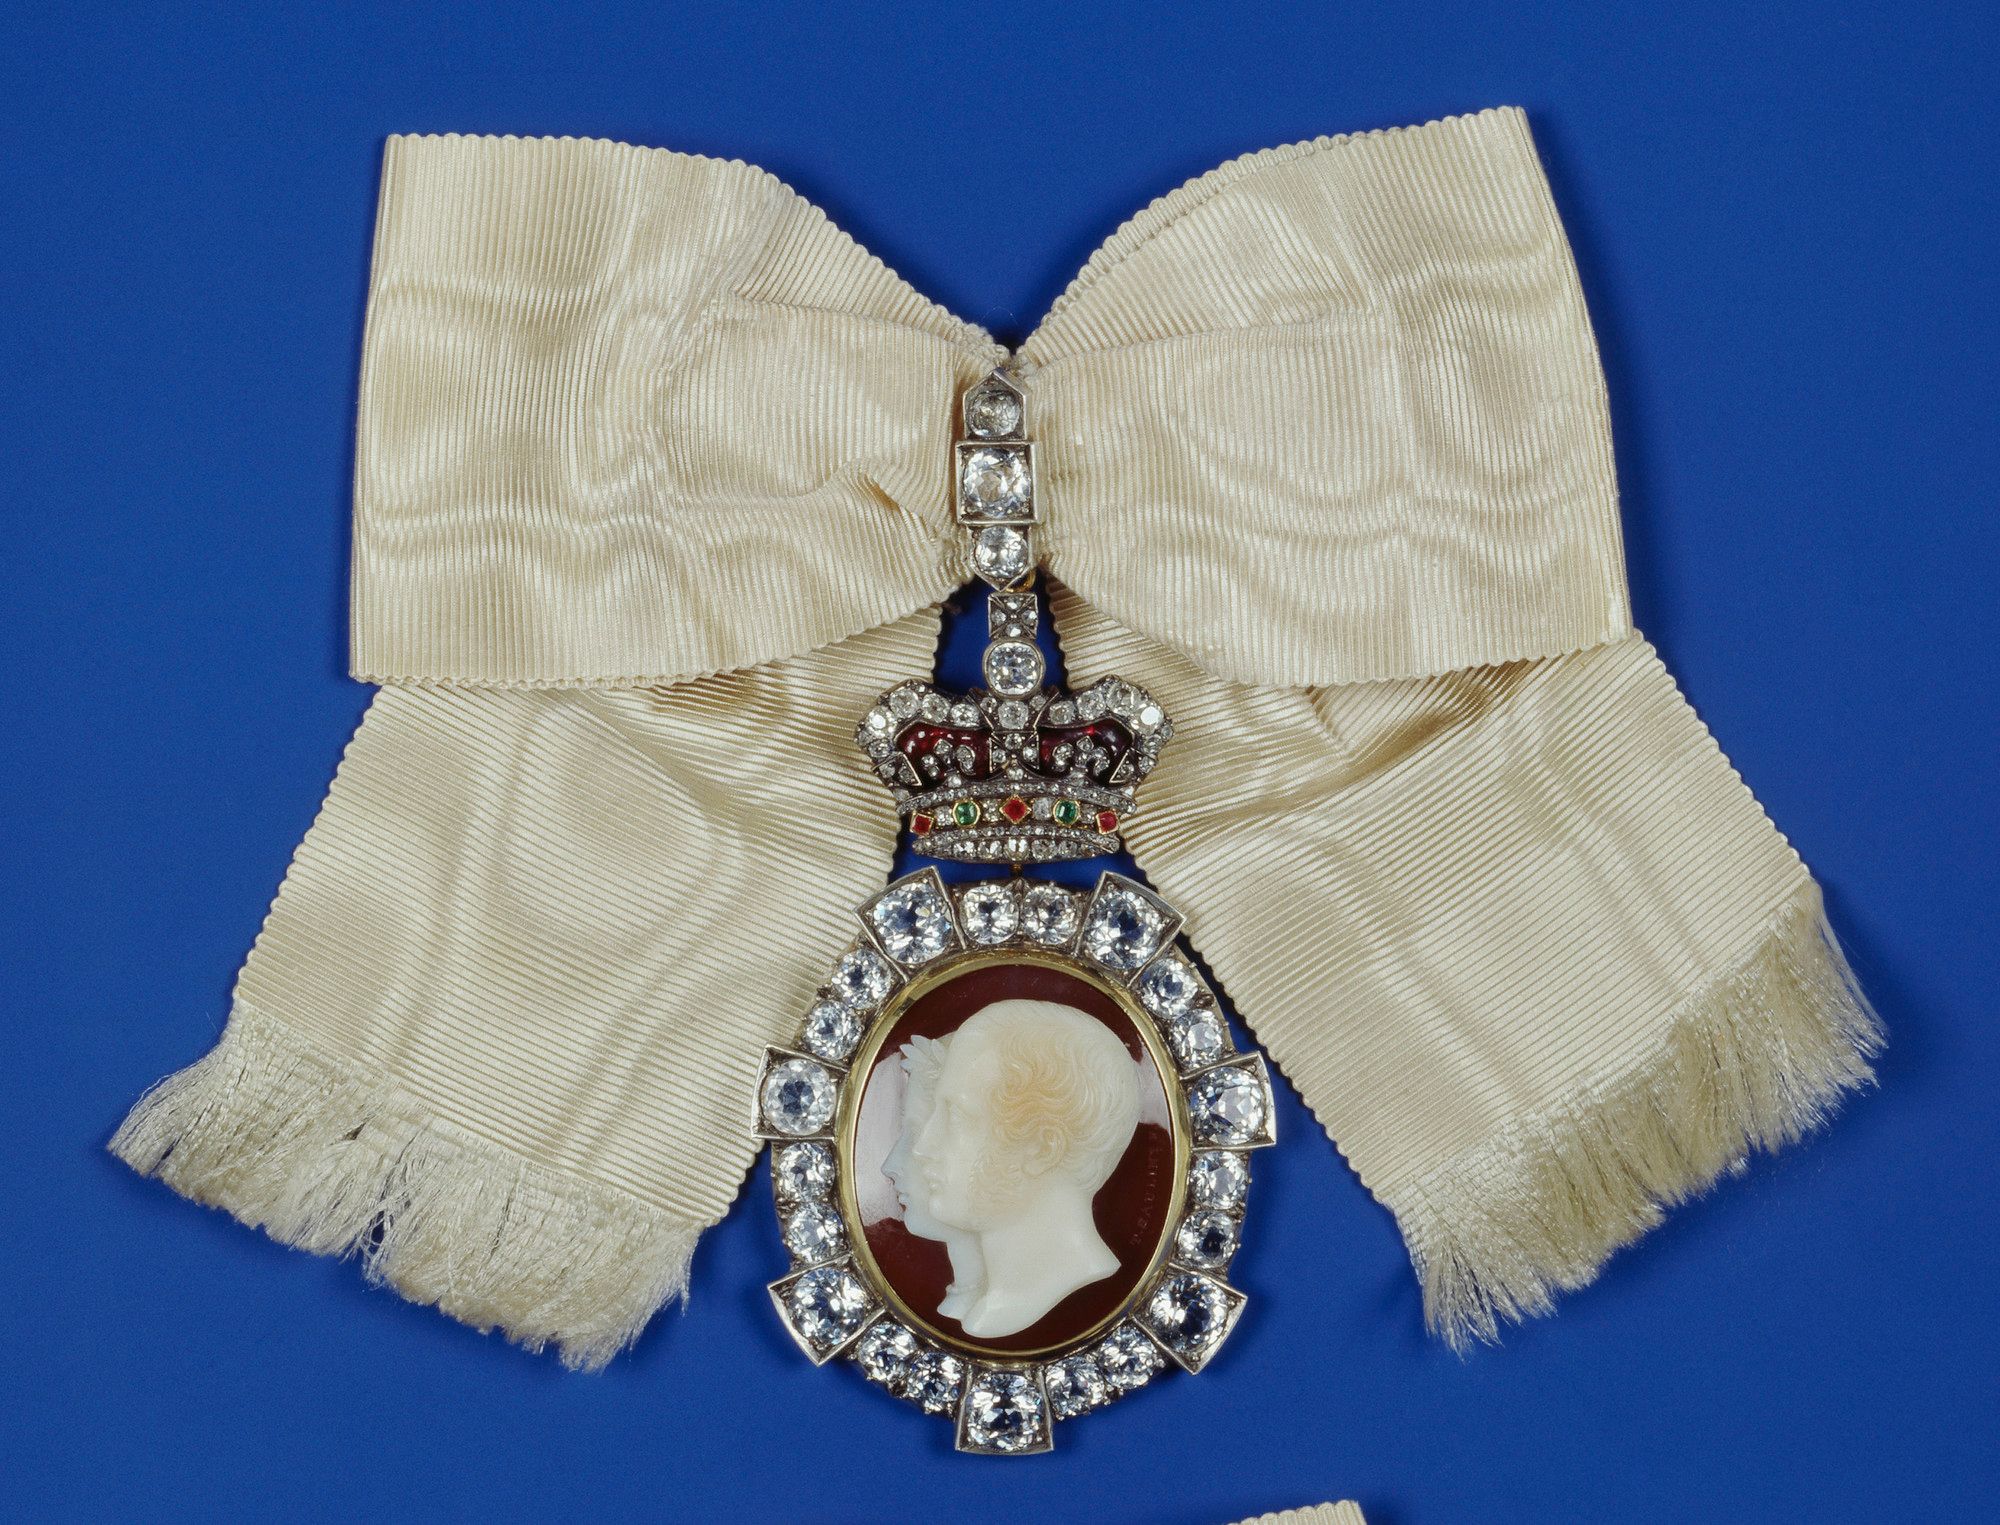 The jugate heads in this cameo are of Prince Albert and Queen Victoria. It was a gift to mark the confirmation gift for the couple's eldest daughter in 1856. It was repeated as a gift for their second daughter Alice, three years later. 